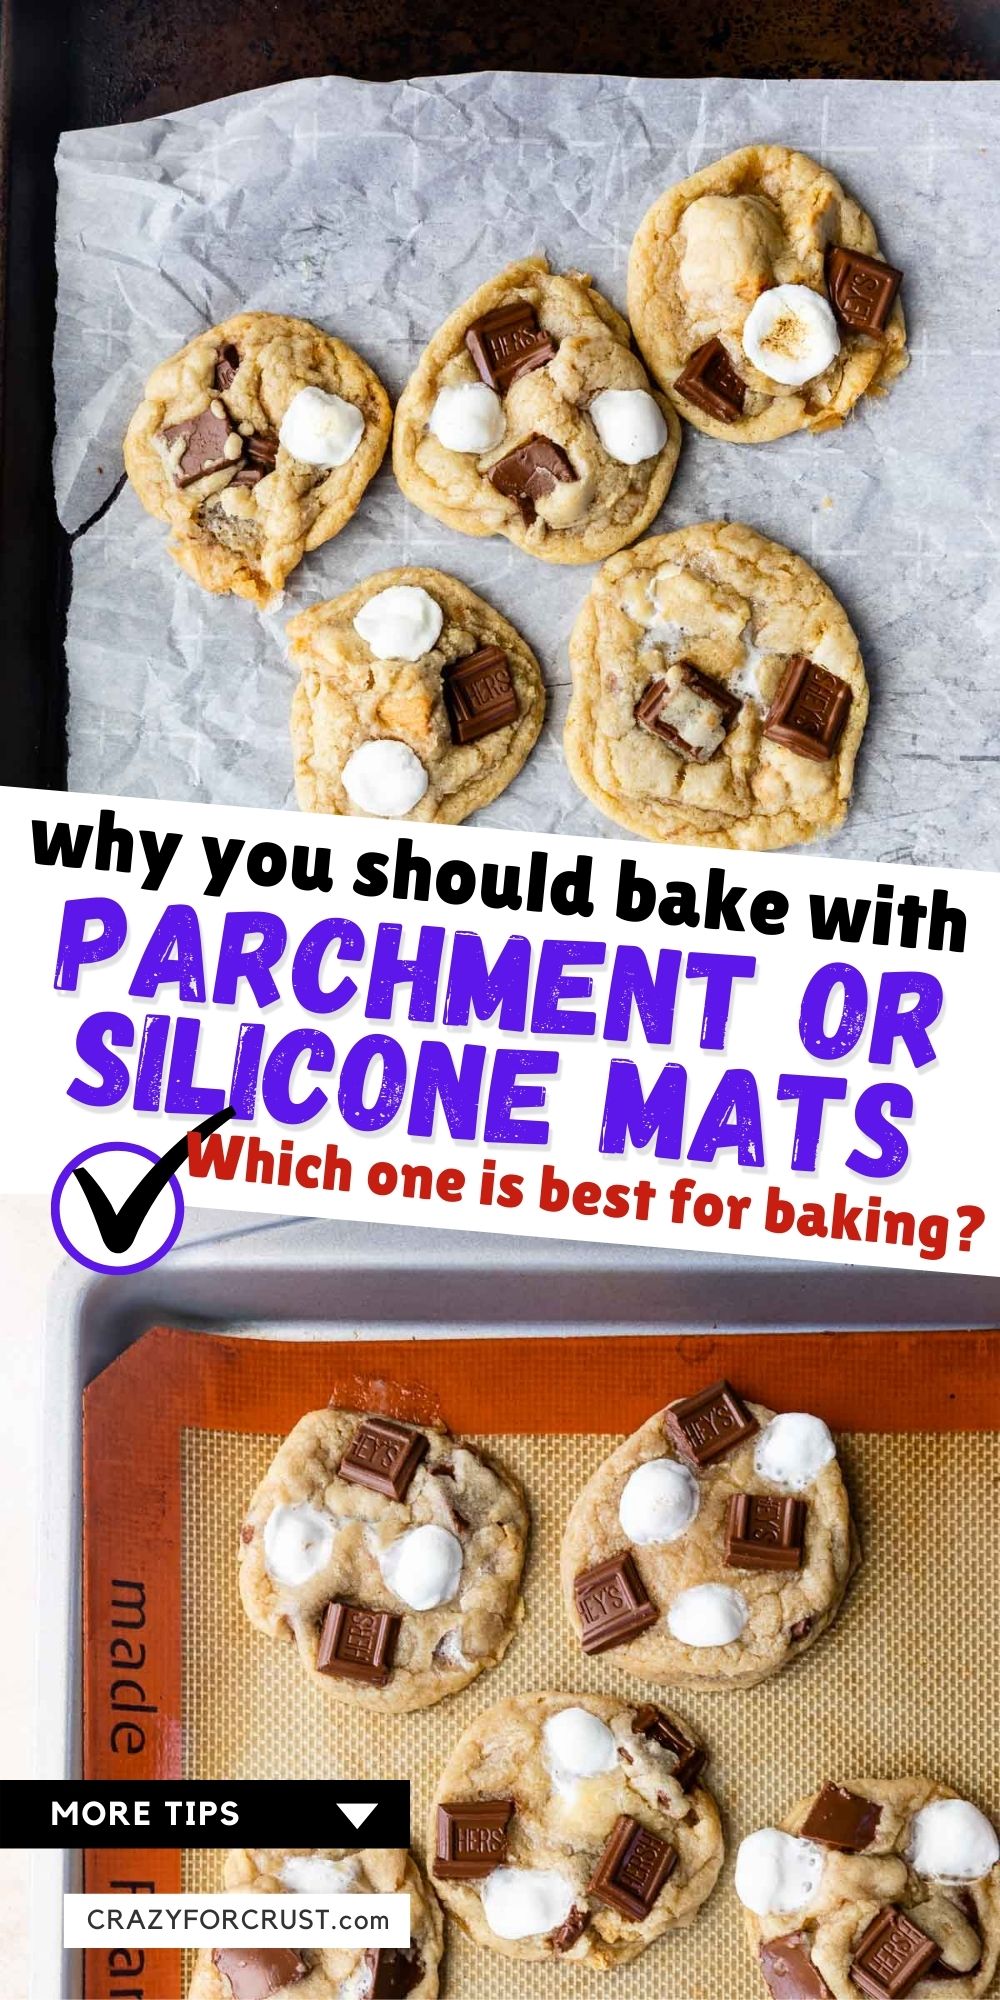 What Can I Use Instead of Parchment Paper